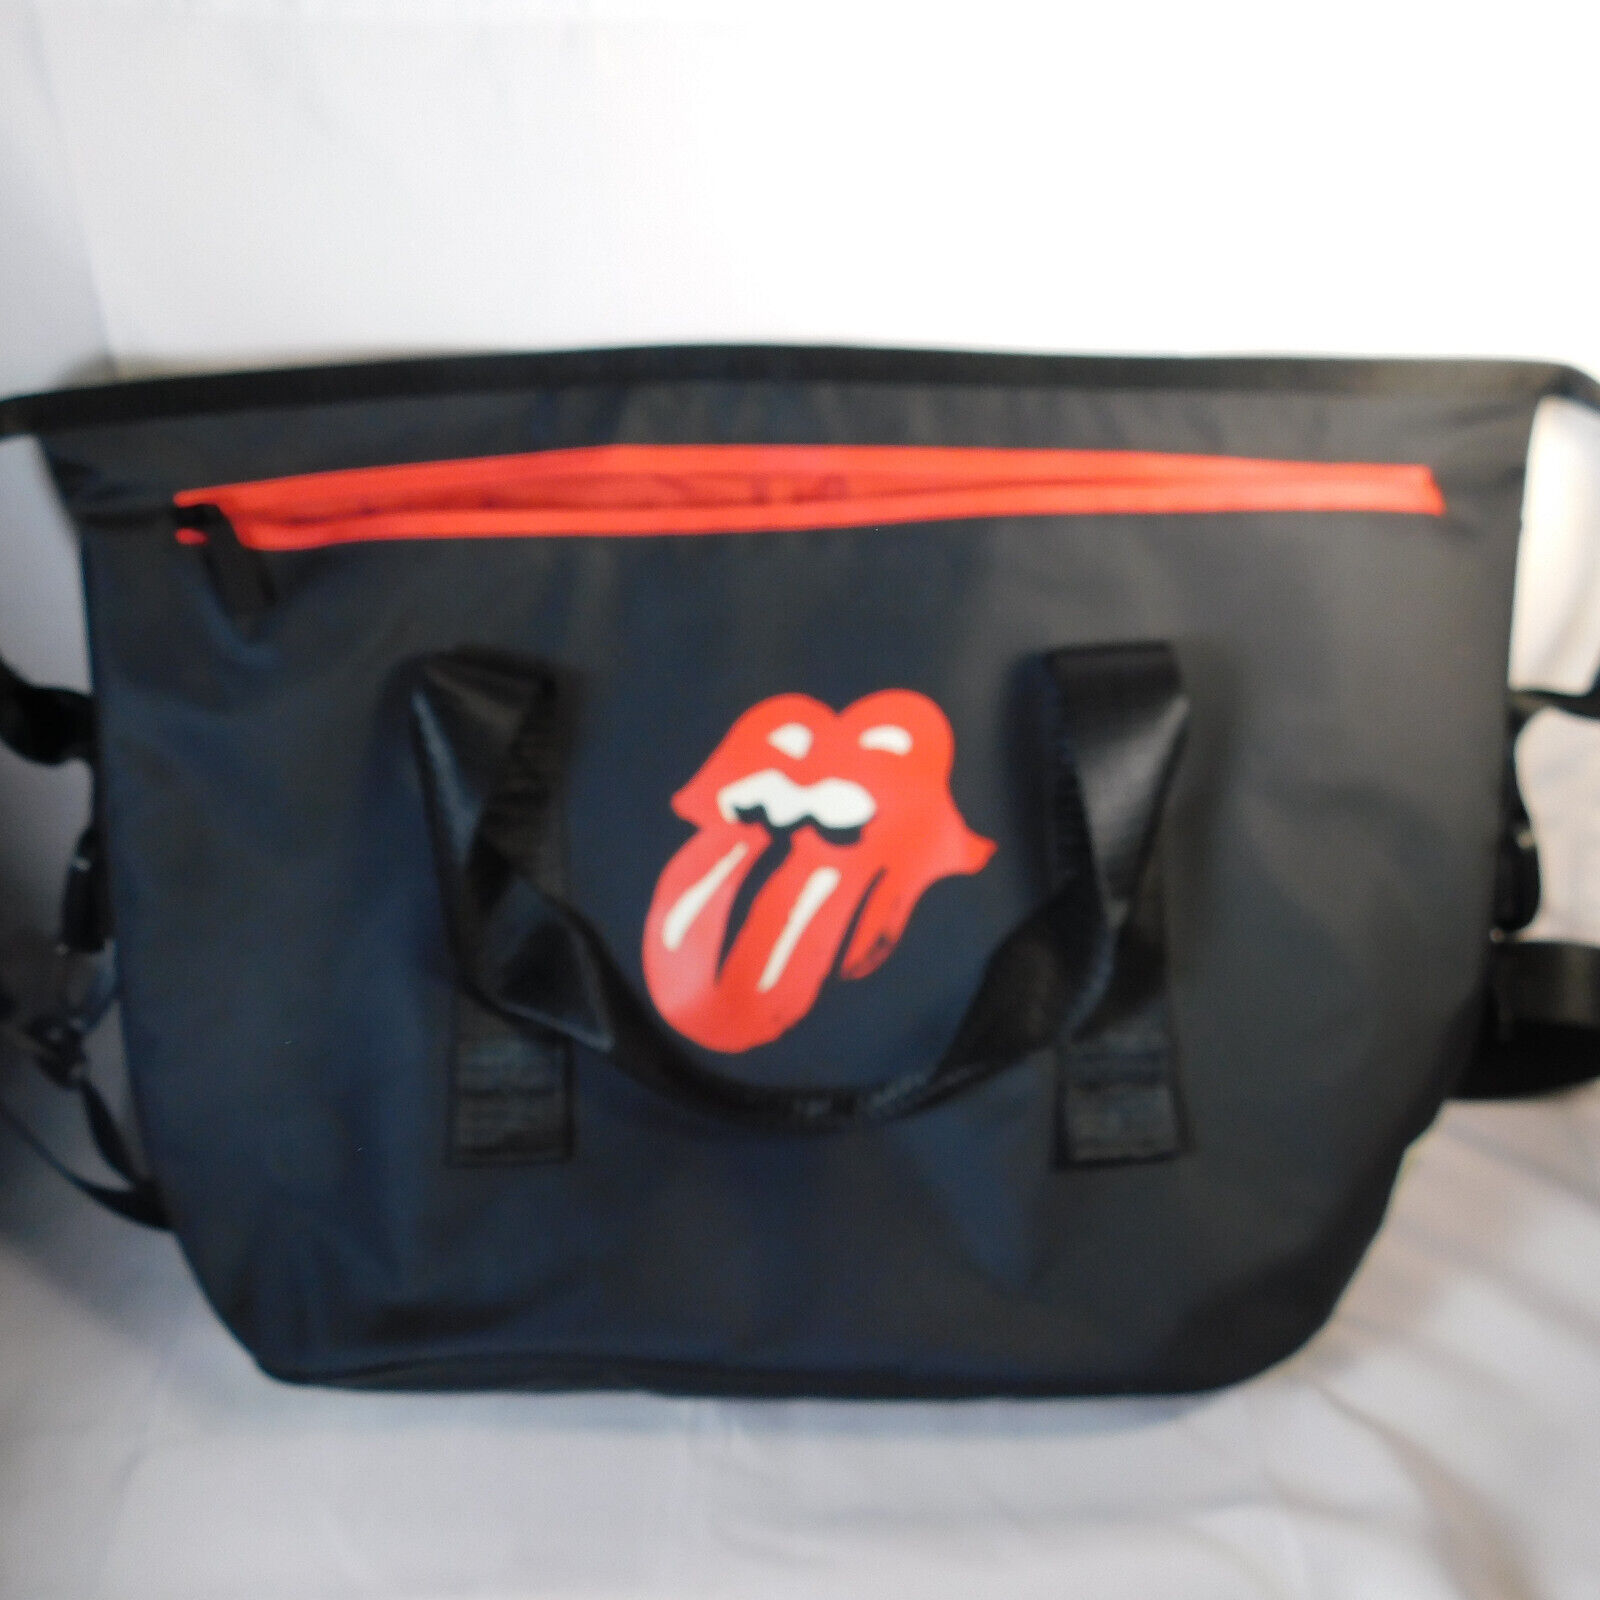 Rolling Stones 2019 No Filter Tour Tote Cooler Bag with Strap